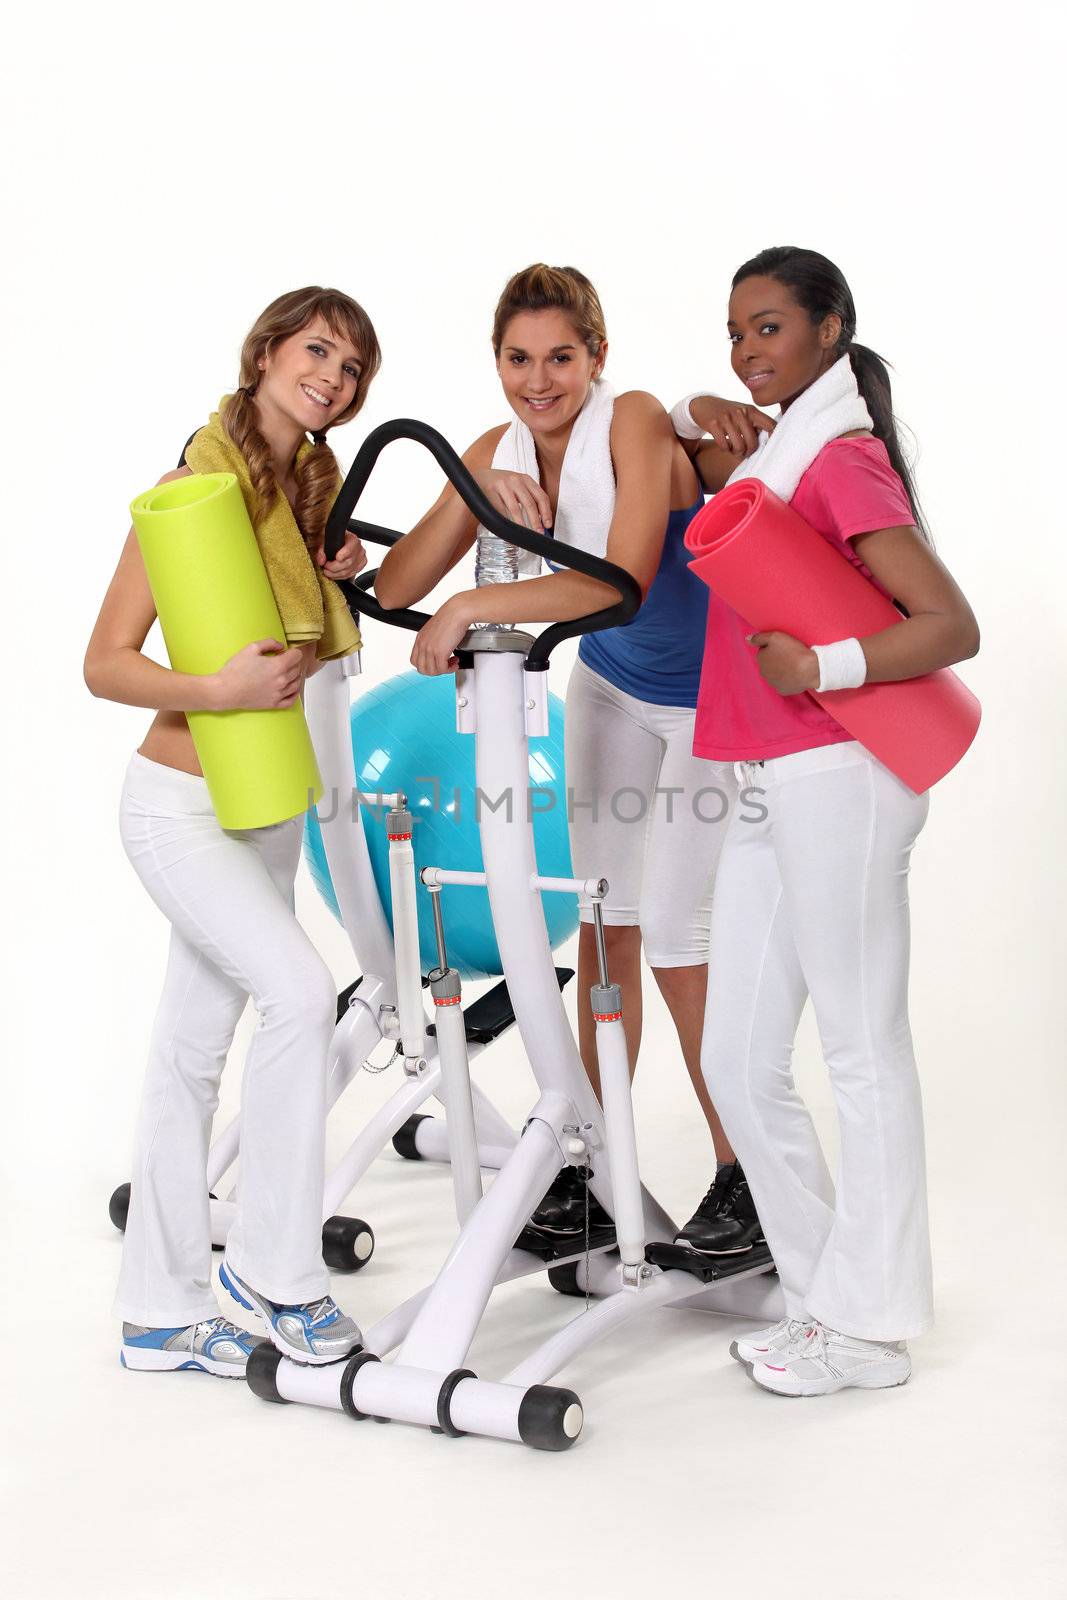 Girls with gym equipment by phovoir